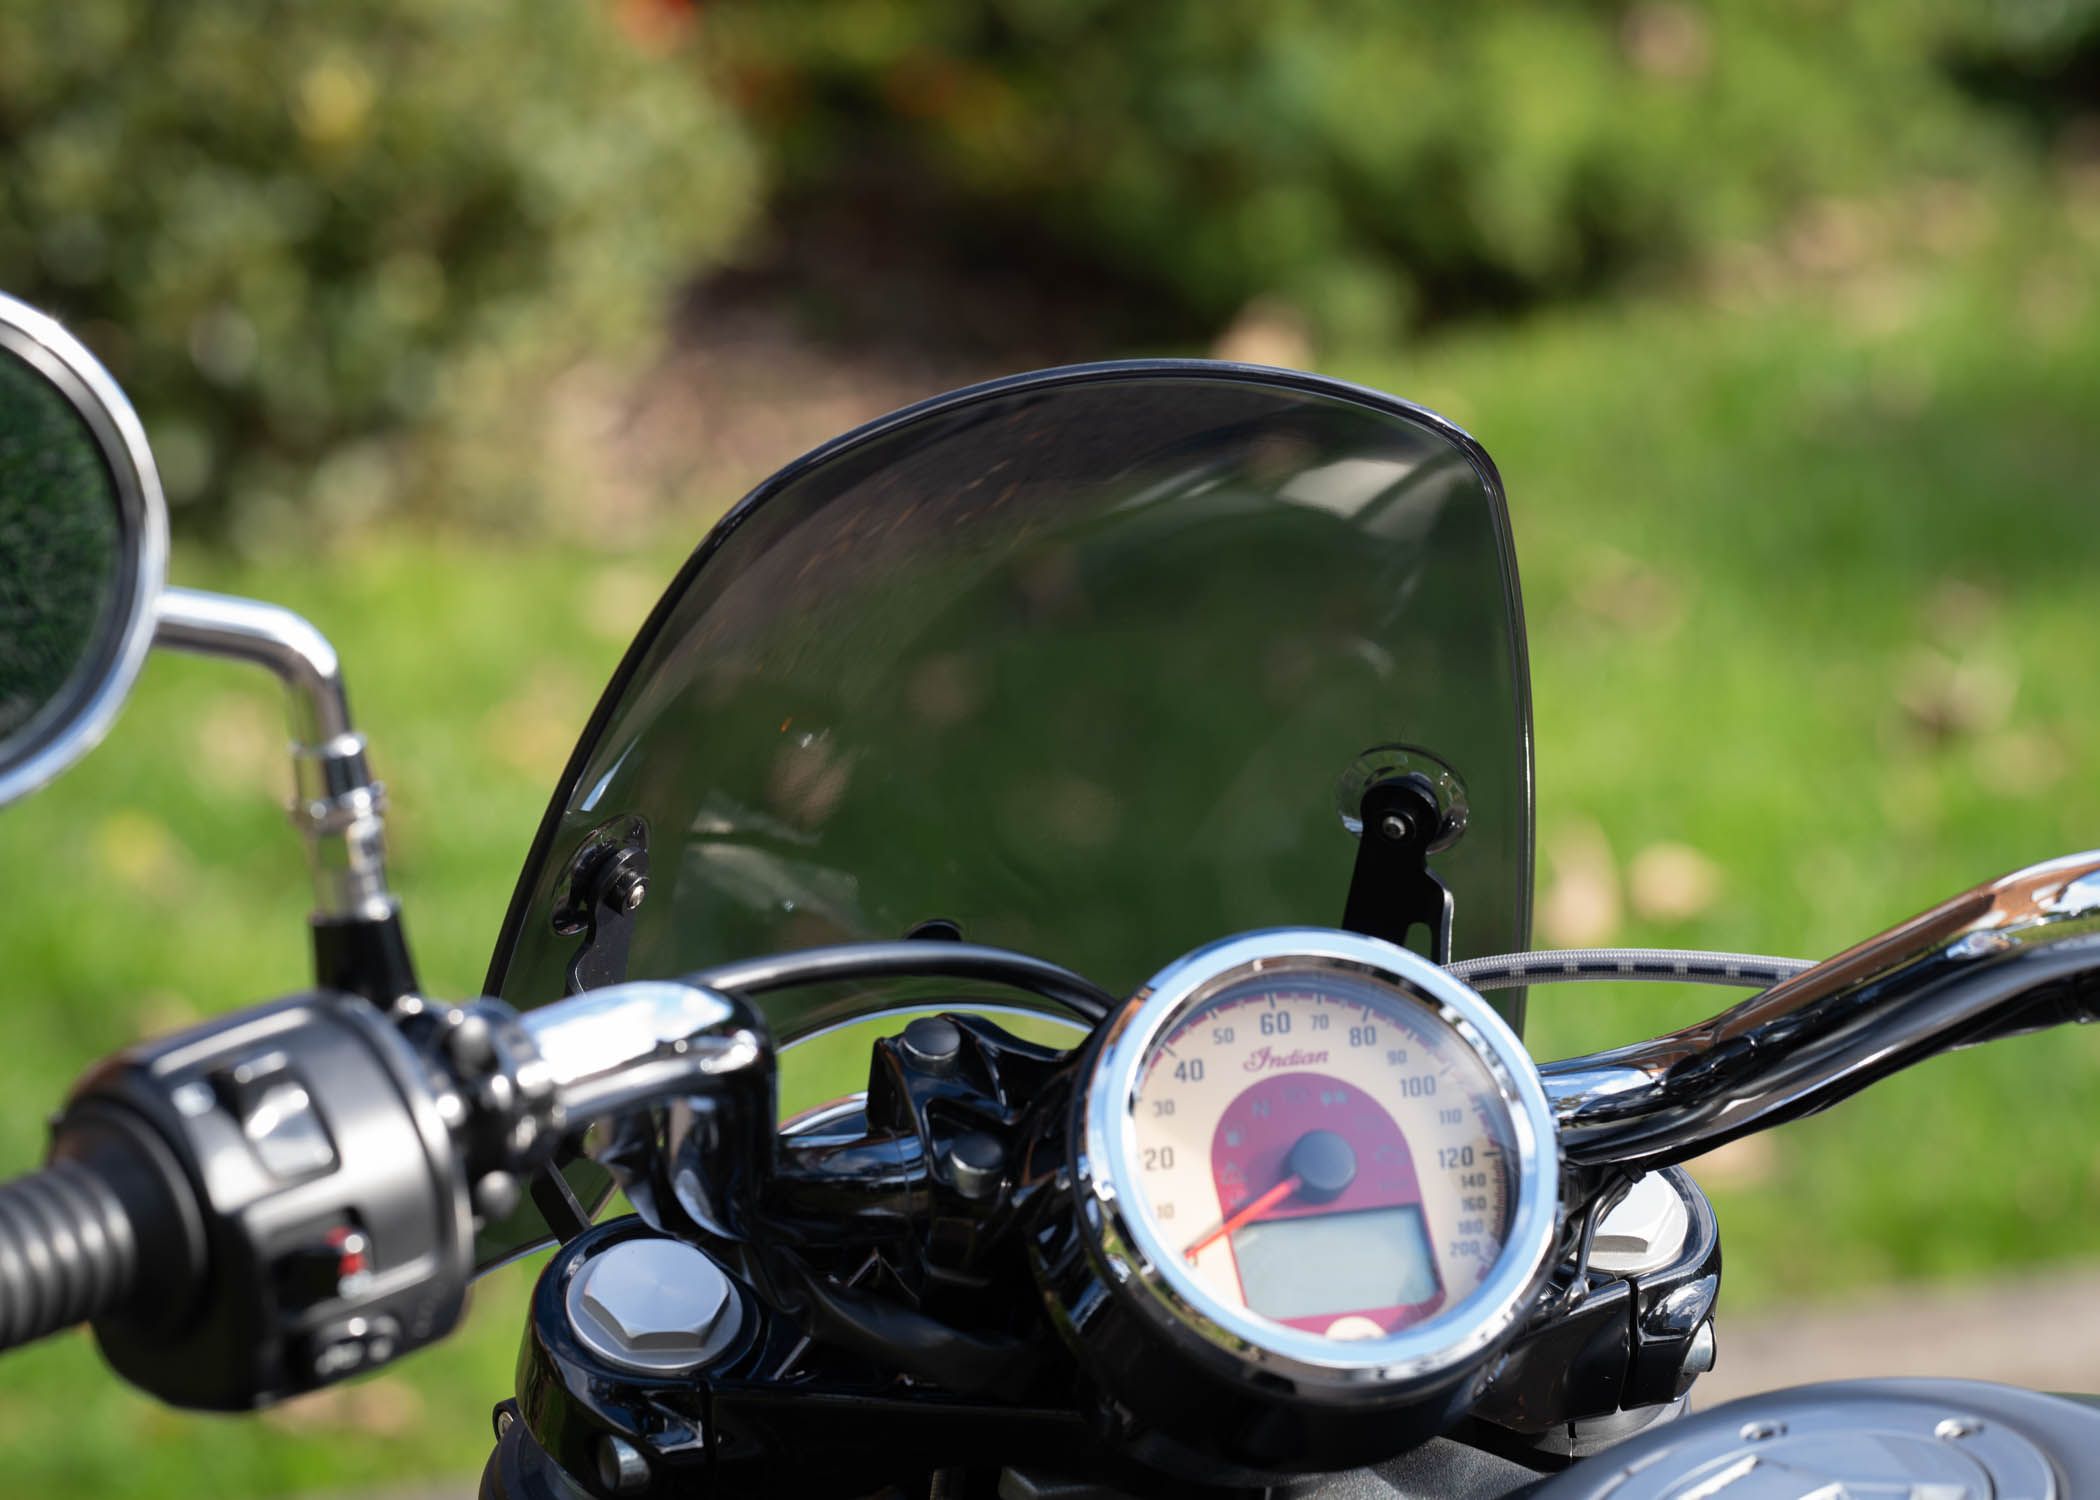 The Dart flyscreen is the original and best small motorcycle windshield on the market since 1995